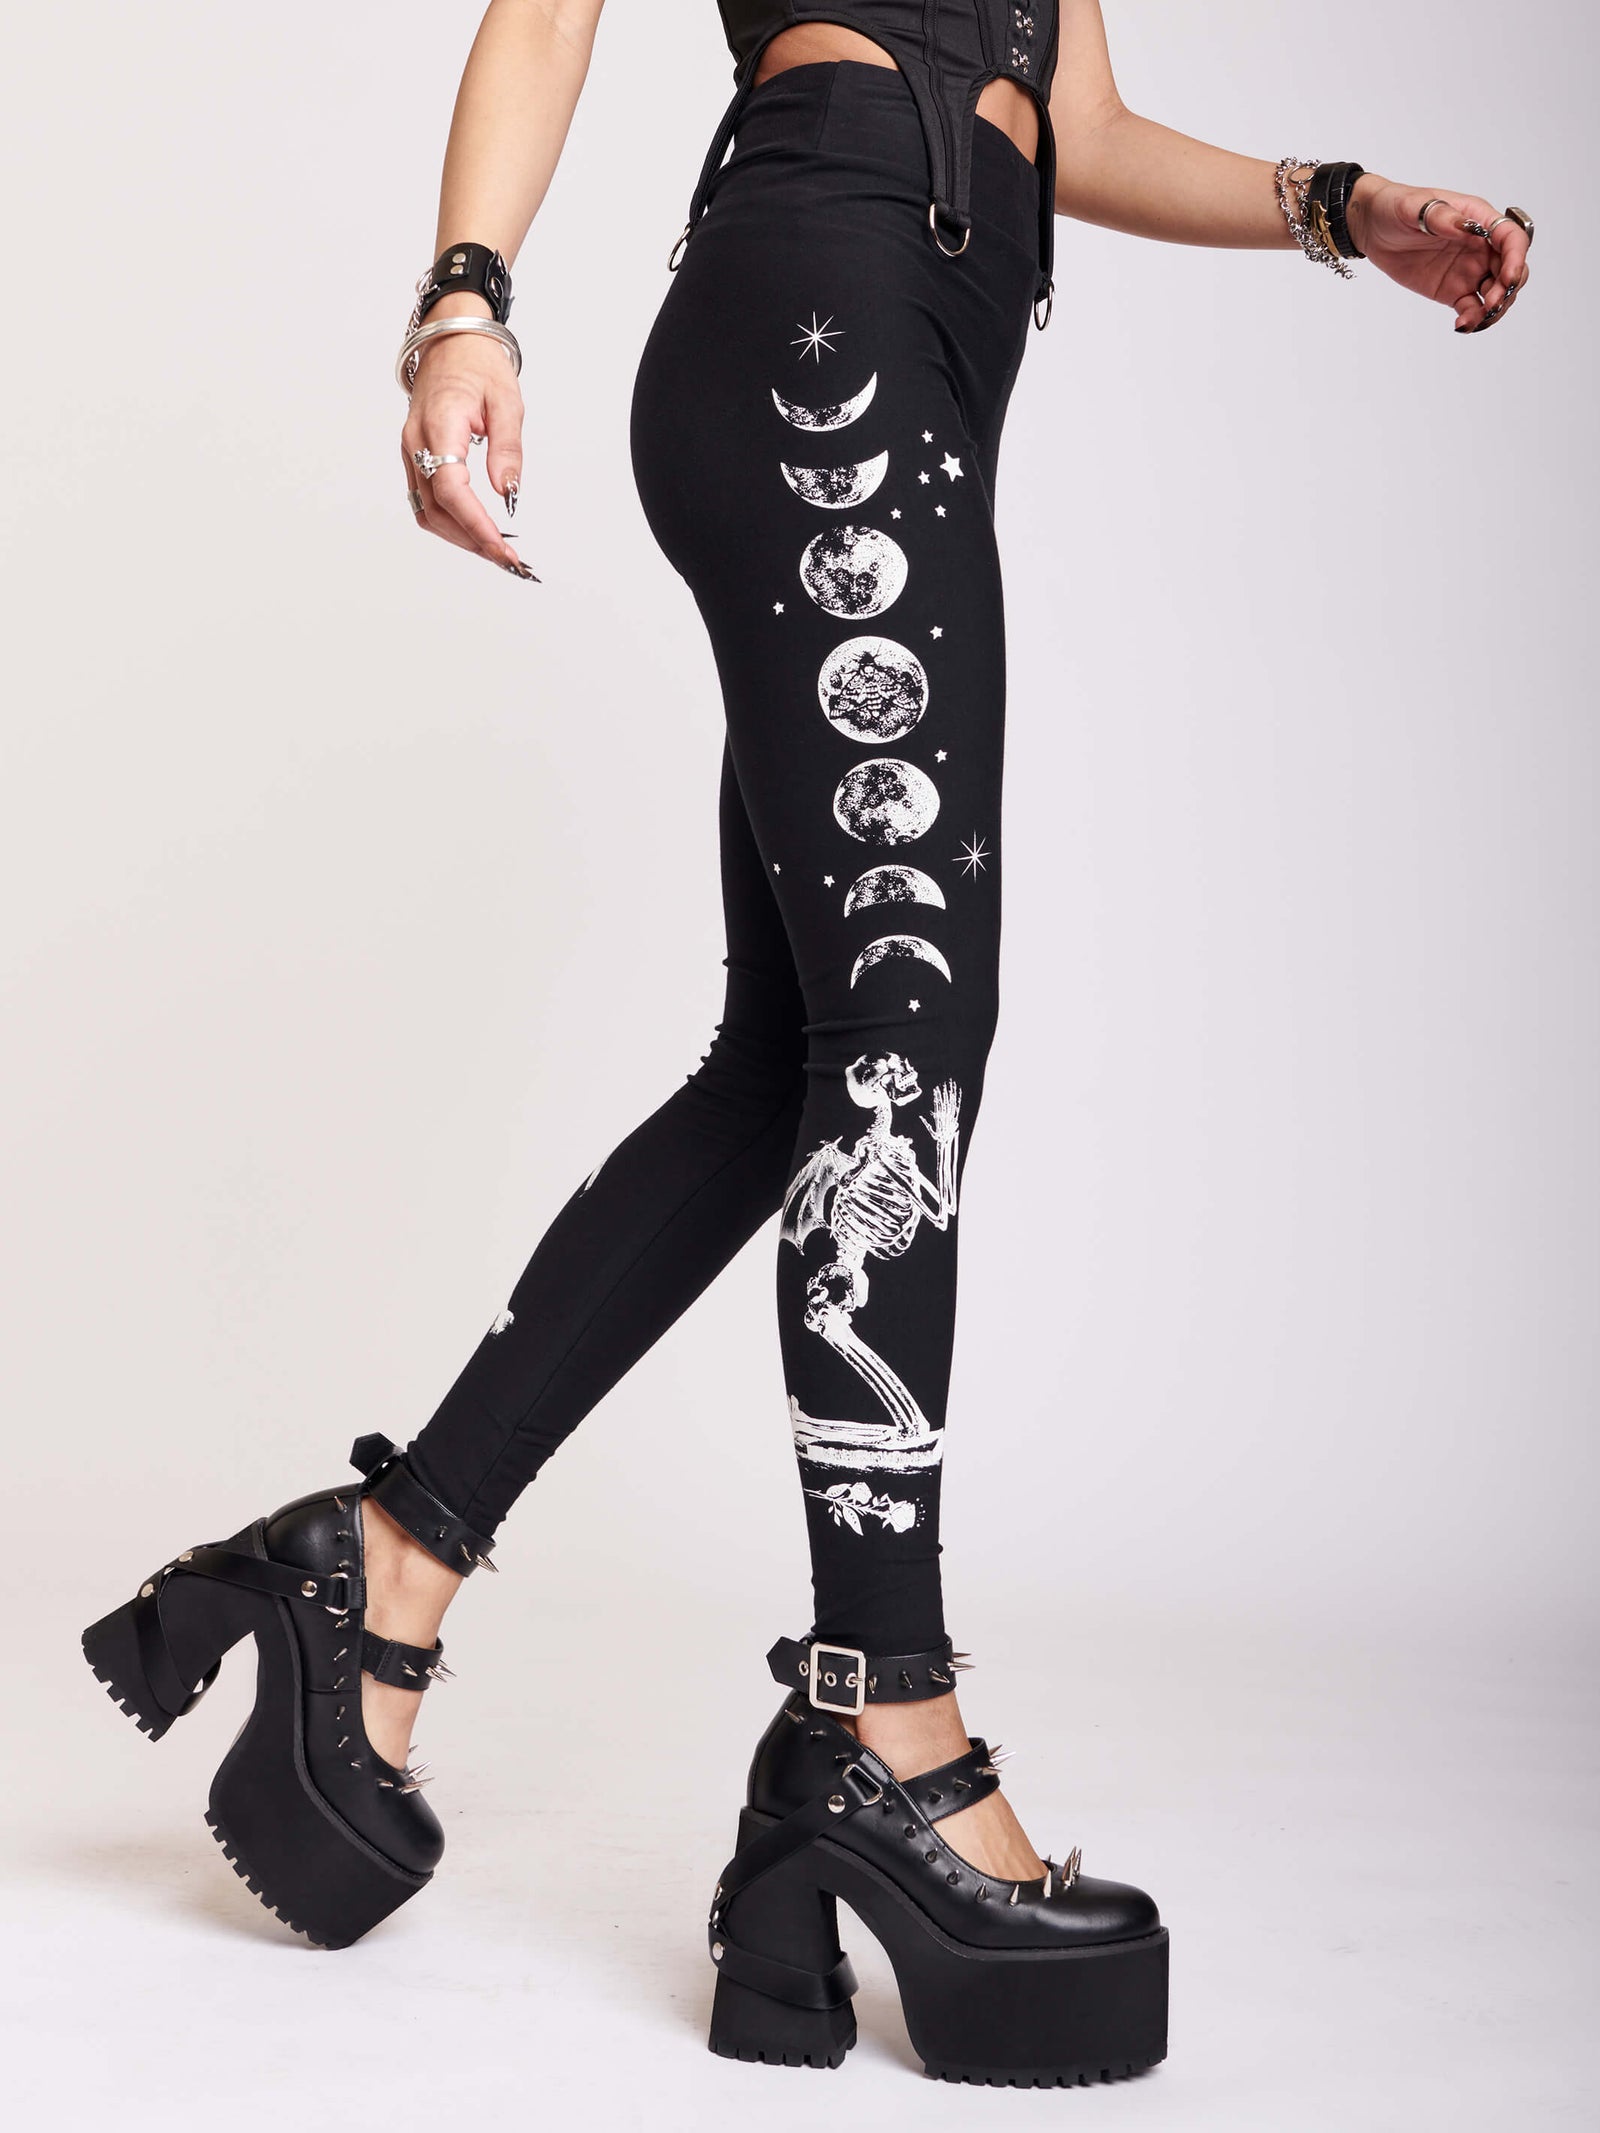 Punk Goth Clothes  Gothic Punk Outfits by Midnight Hour Tagged